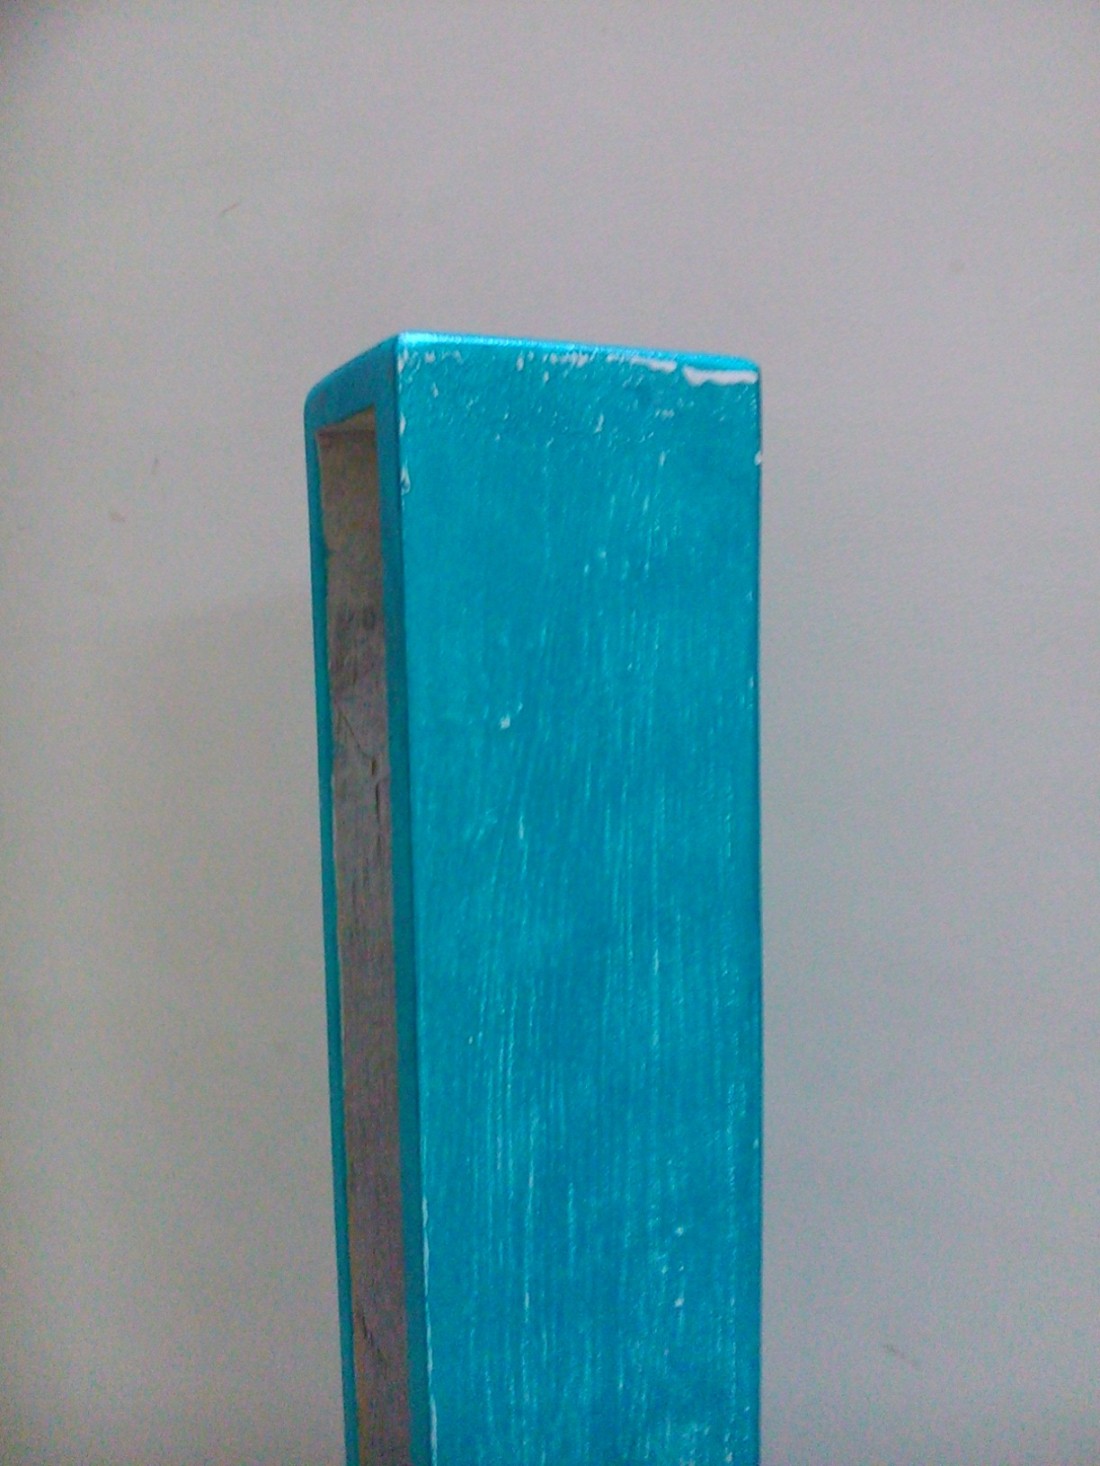 Tower with distressed turquoise paint